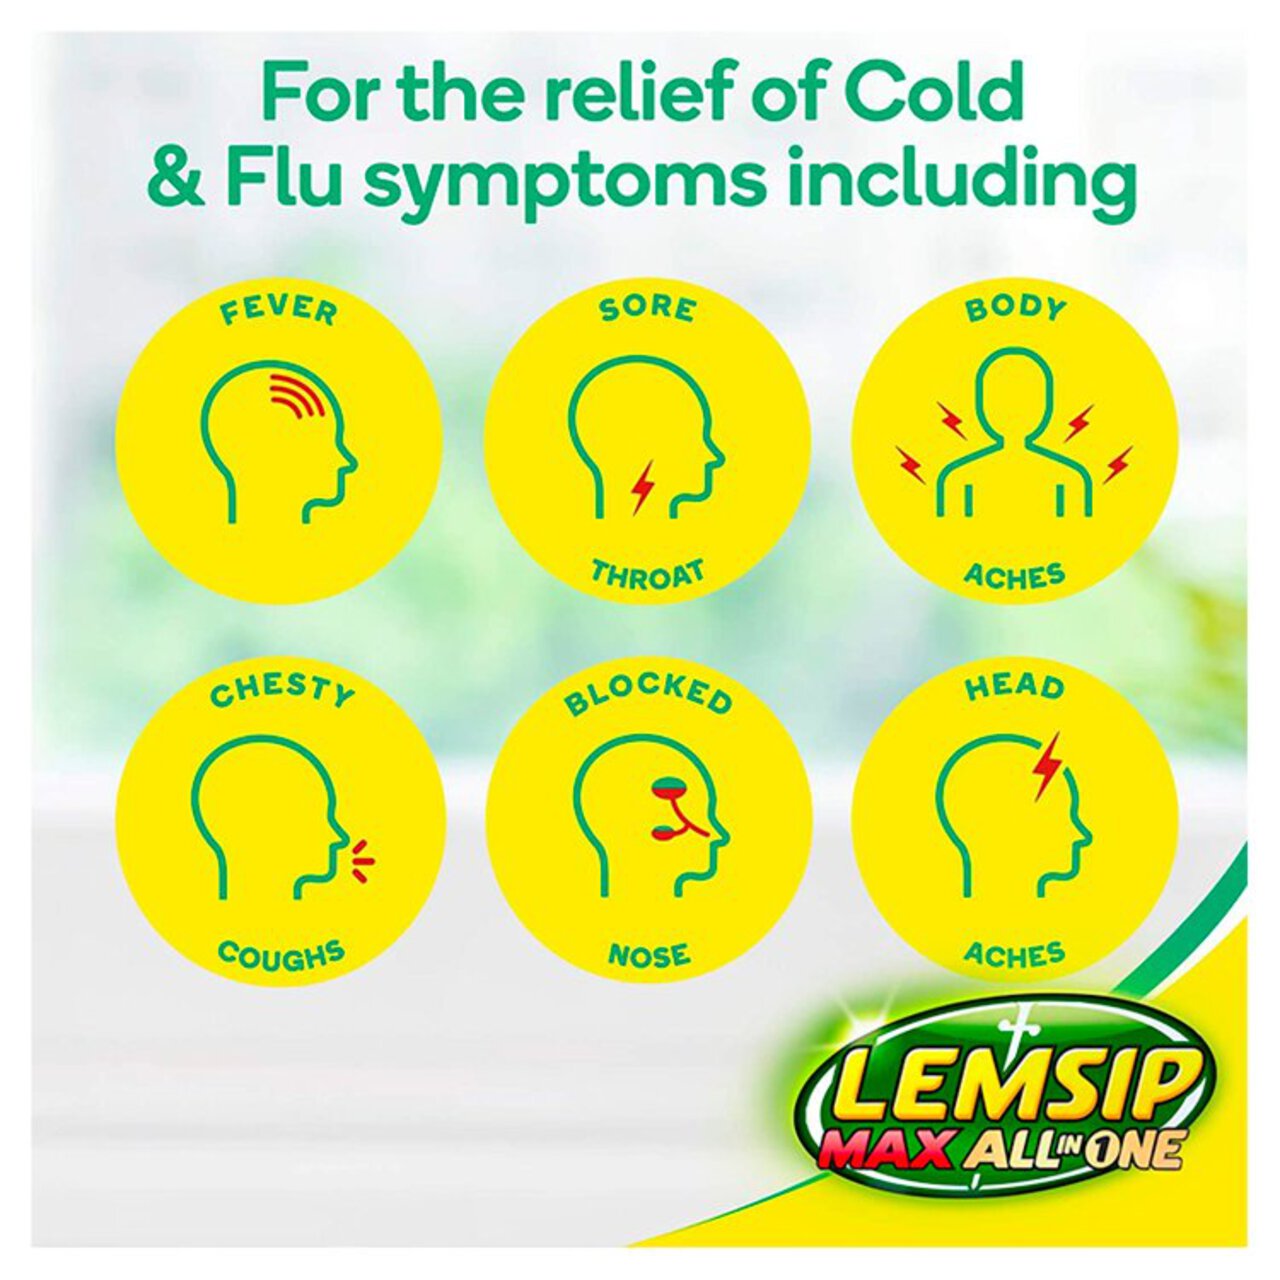 Lemsip Max All in One Cold & Flu Wild Berry & Hot Orange Sachets 8 per pack